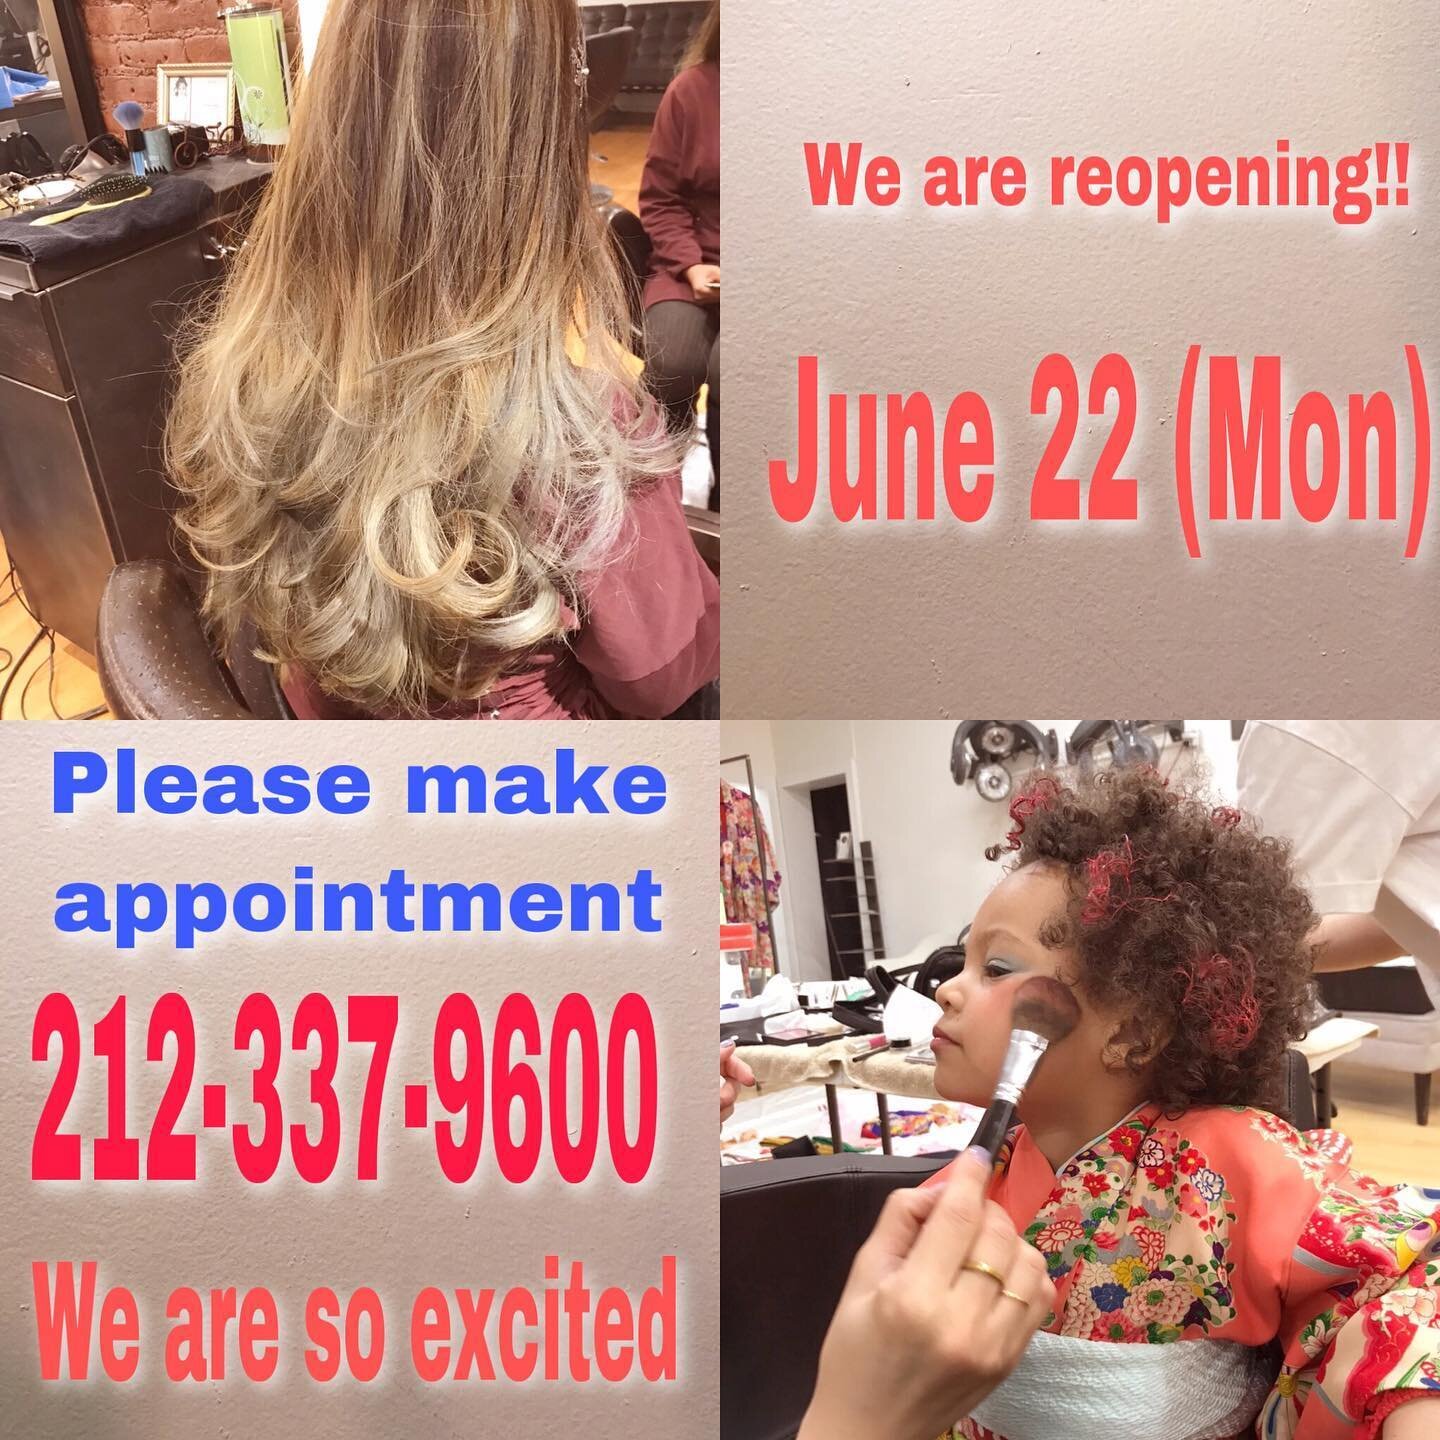 🎉Dear customers 🎉

Reopen will June 22(Mon)
We are really excited to see you ❤️ Please make appointment✨
You&rsquo;re more than welcome to call
212-337-9600